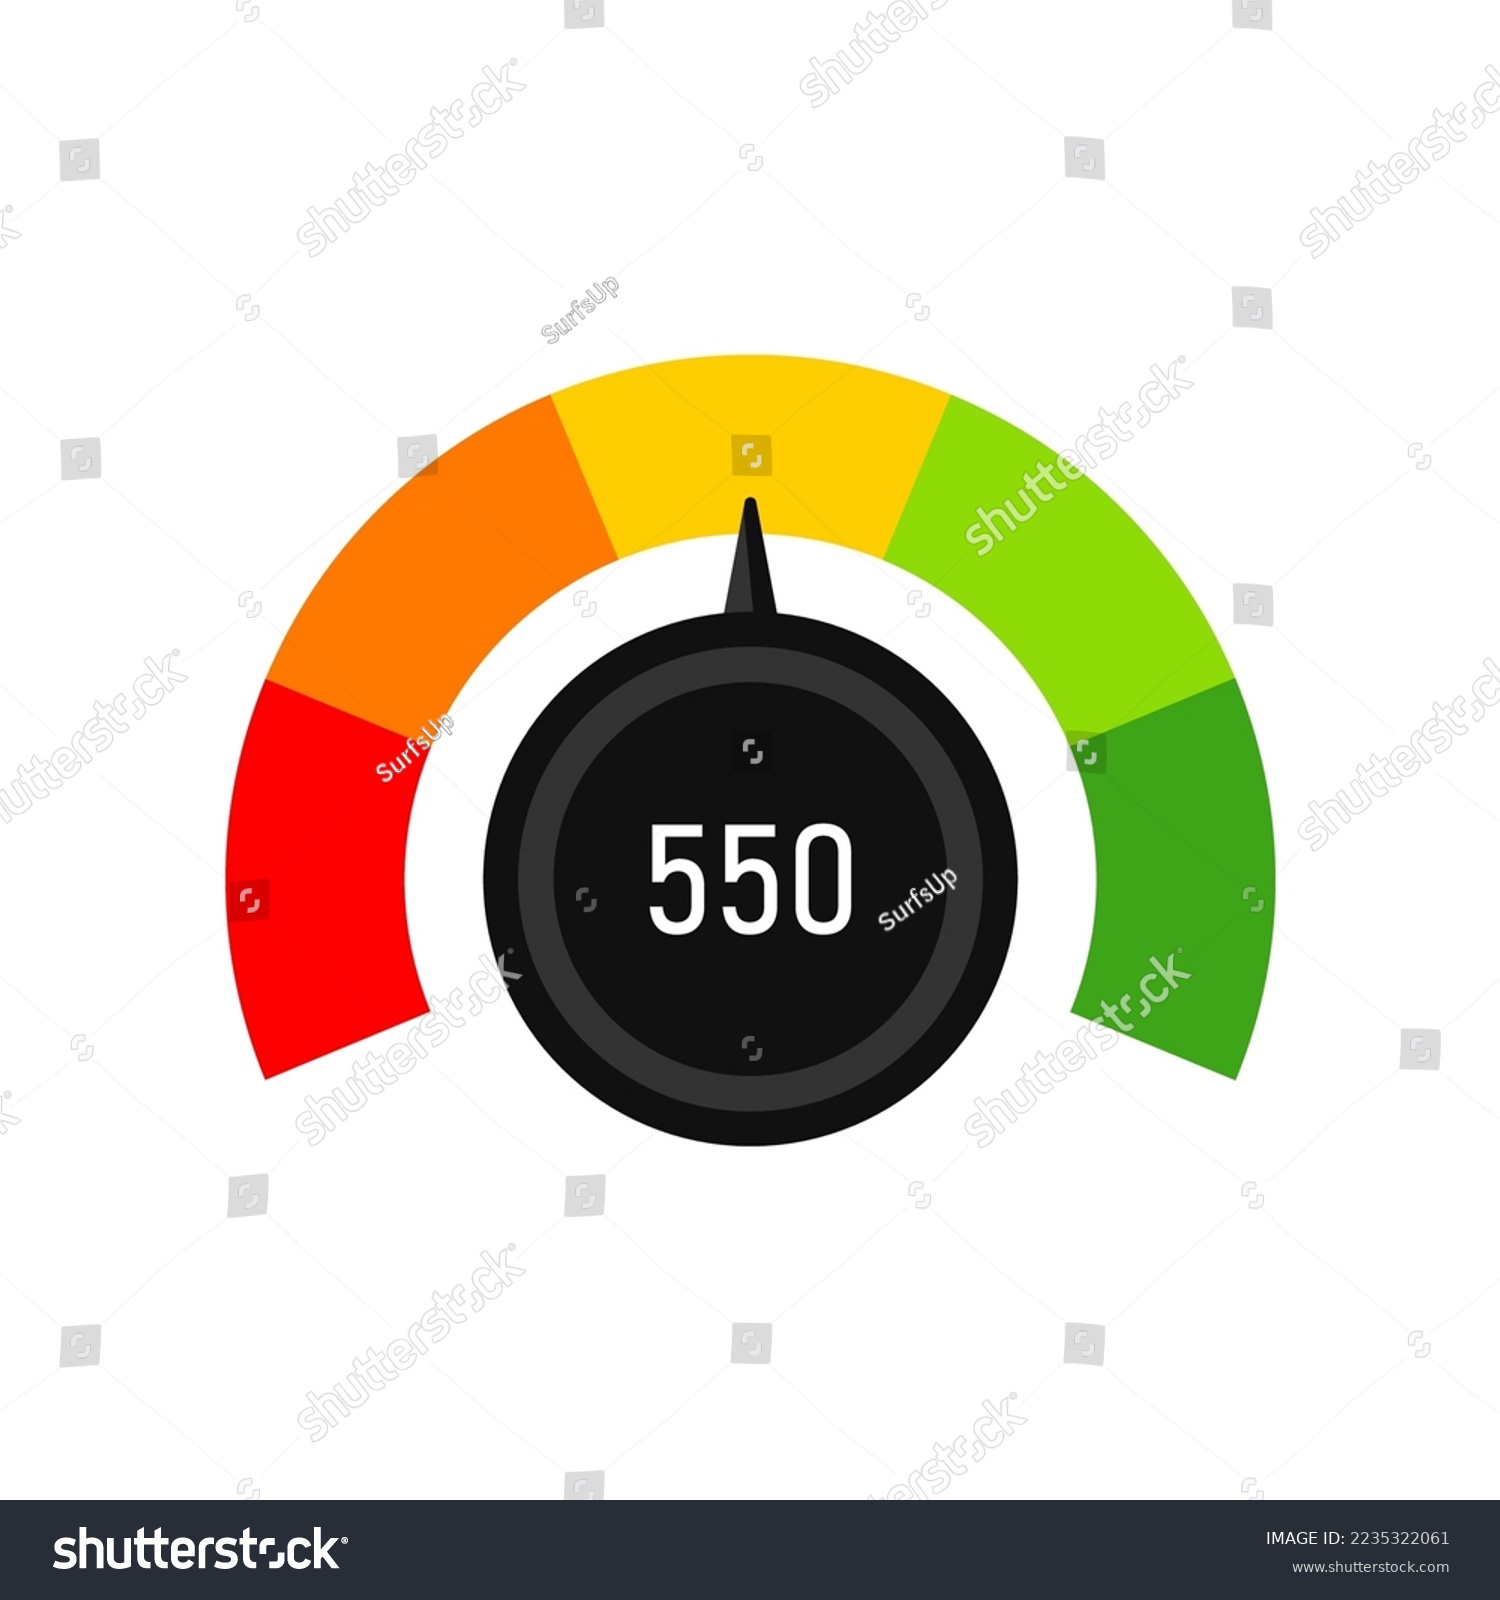 SVG of Business credit speedometer with middle score illustration. Indicator with color blocks from red to green, customers satisfaction with service. Evaluation, gauge rating meter concept svg